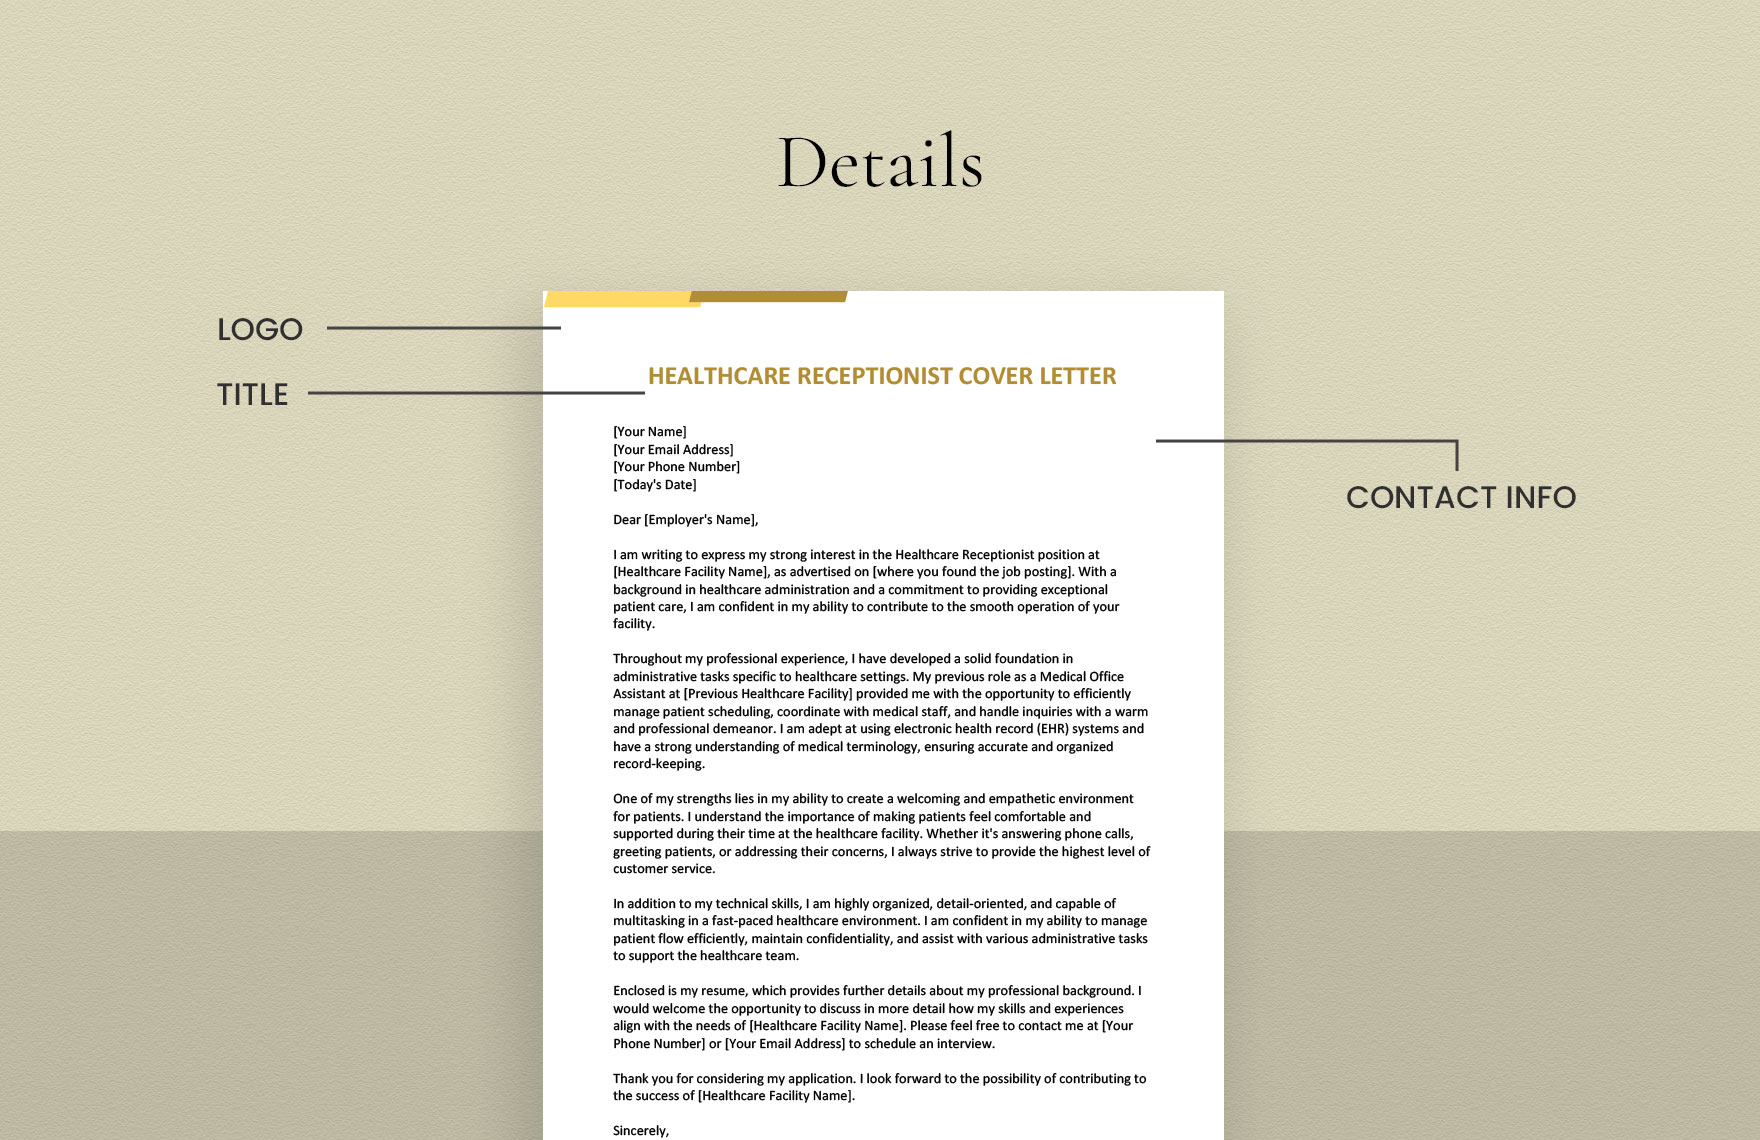 Healthcare Receptionist Cover Letter